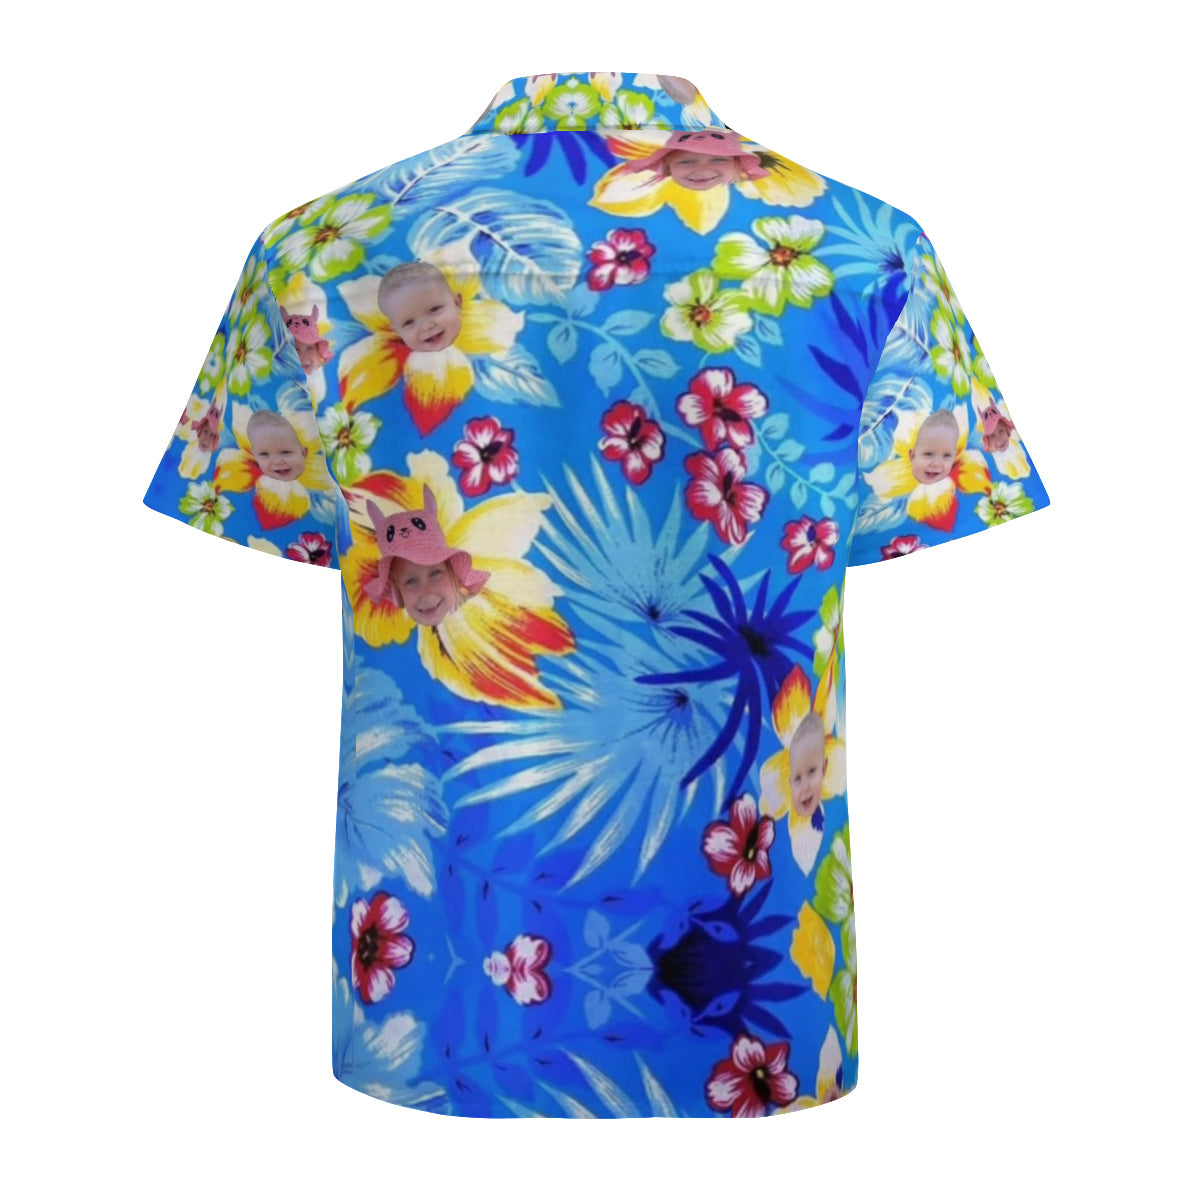 Specialized Hawaiian shirt with your kids or grandkids pictures incorporated